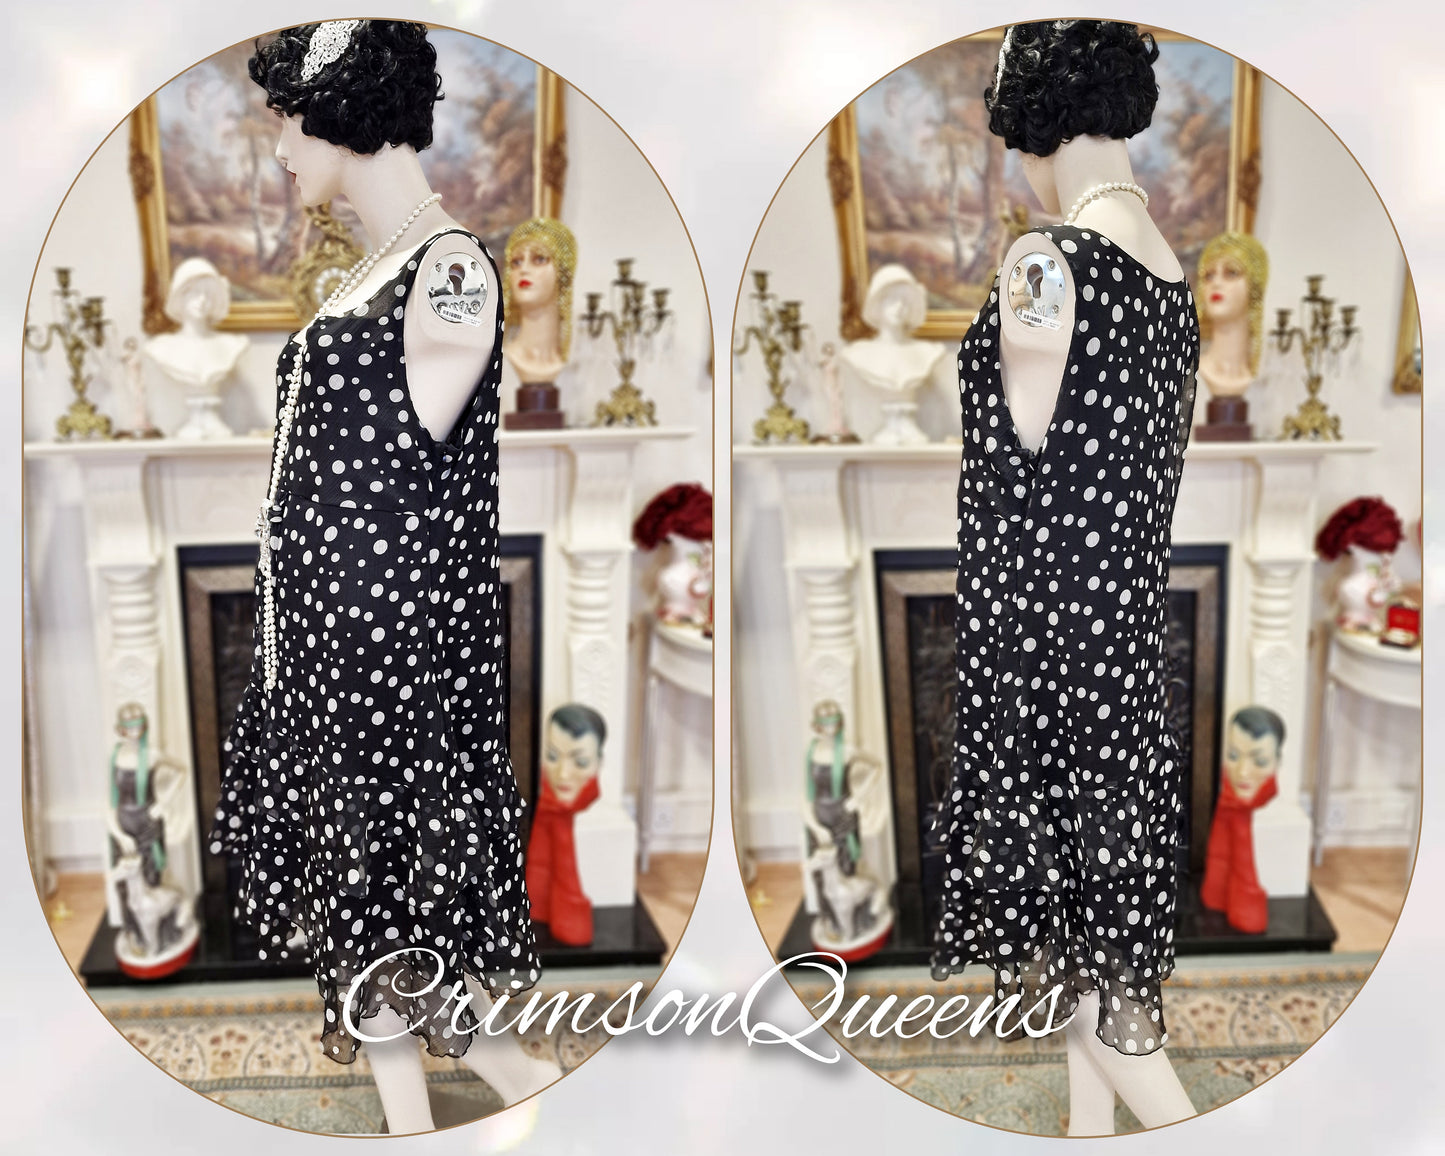 Vintage silk chiffon polka-dot spotted black and white 1920s garden cocktail every day casual frilled dress UK 16/18 US 12/14